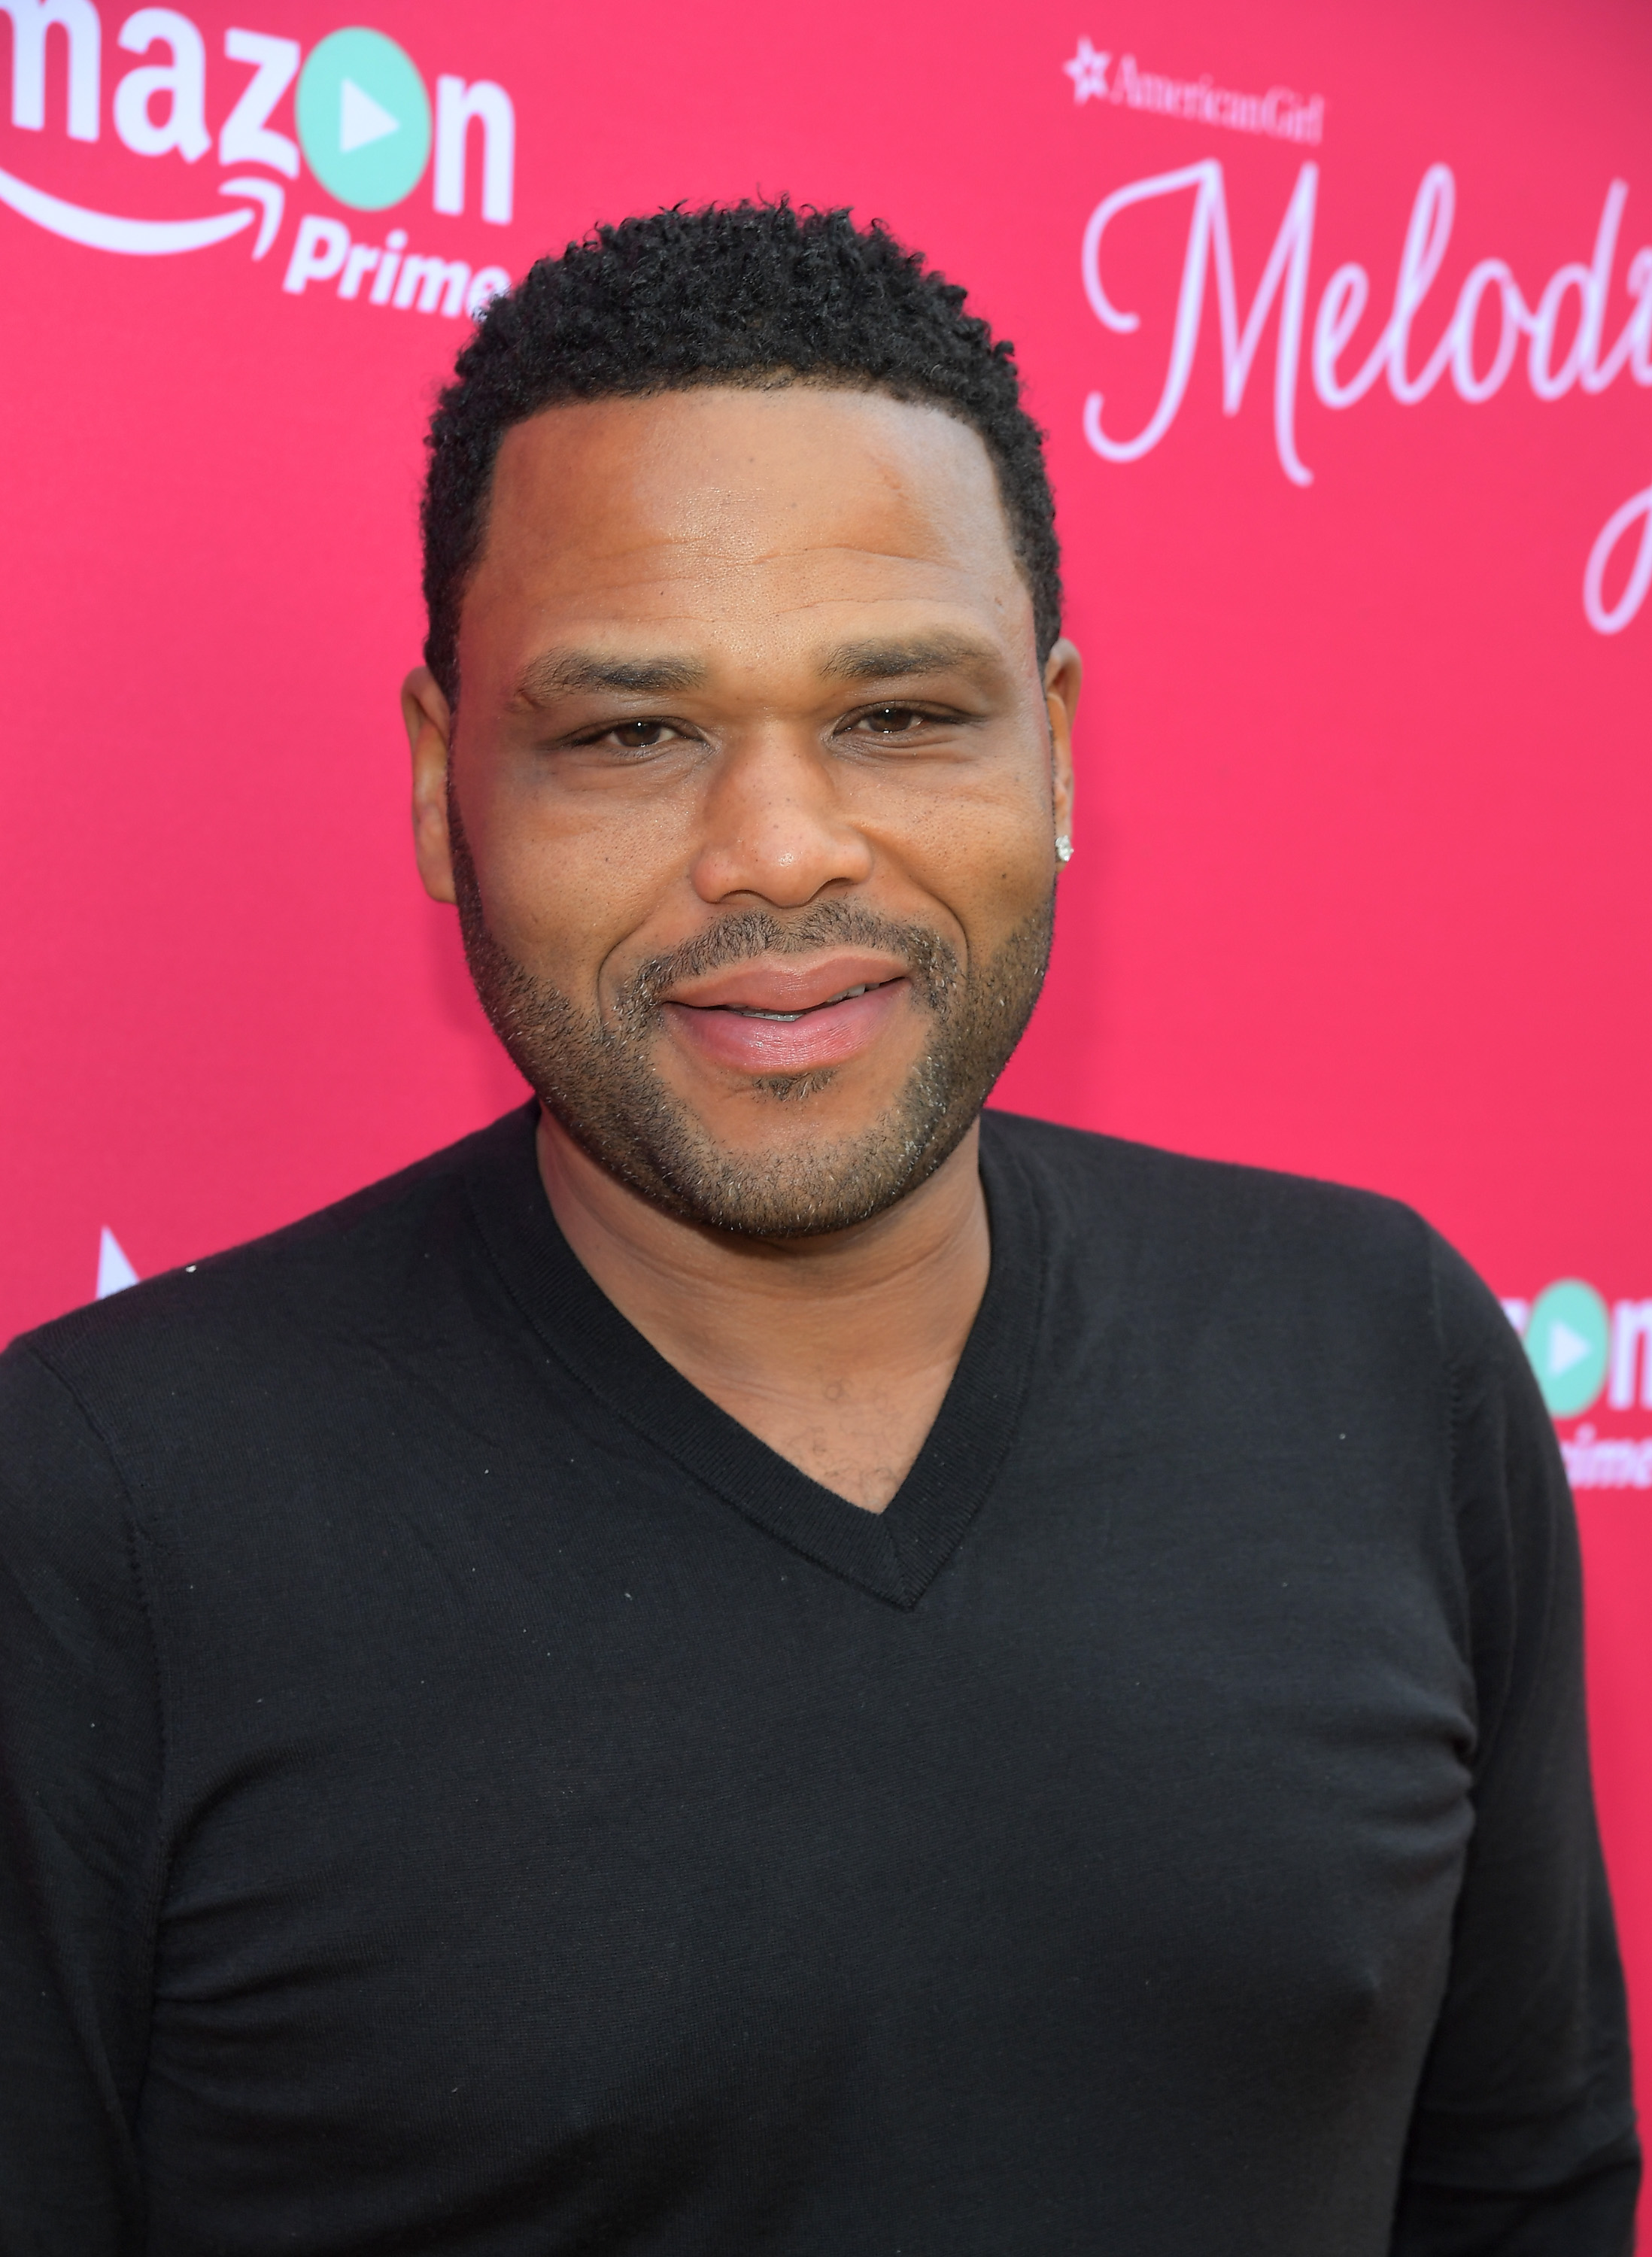 How tall is Anthony Anderson?